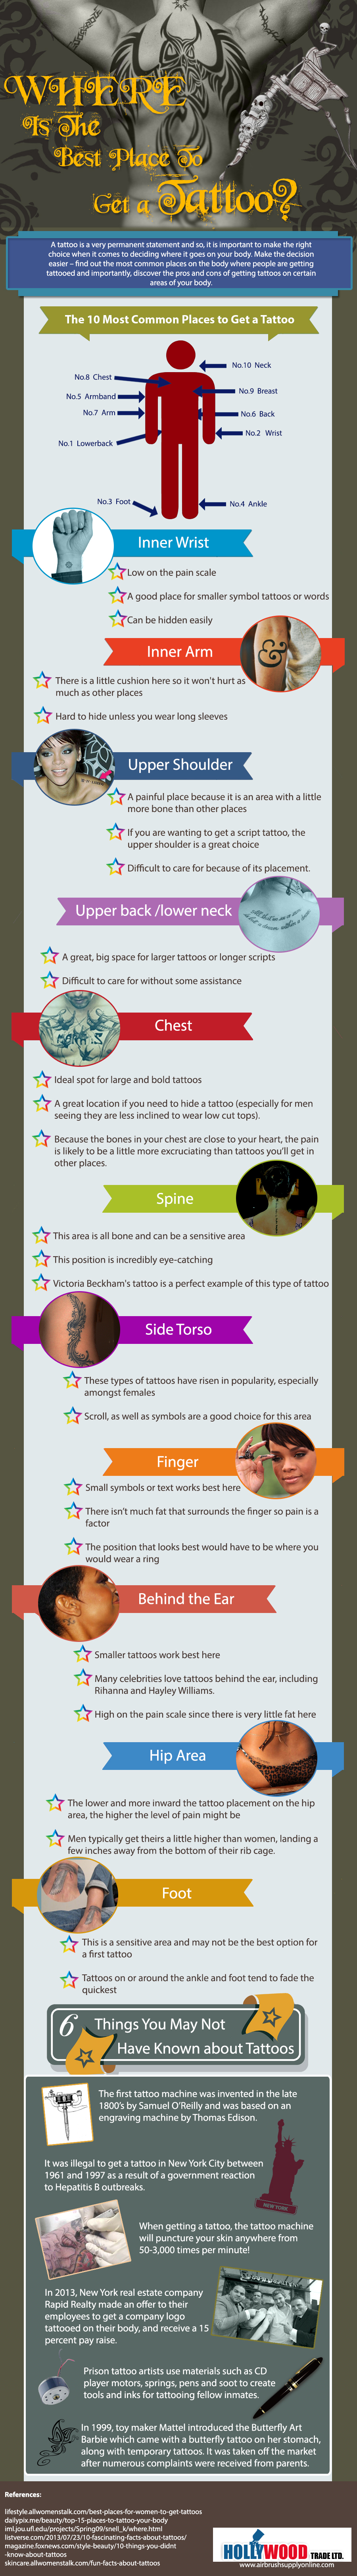 10 most common places for people to get tattoos